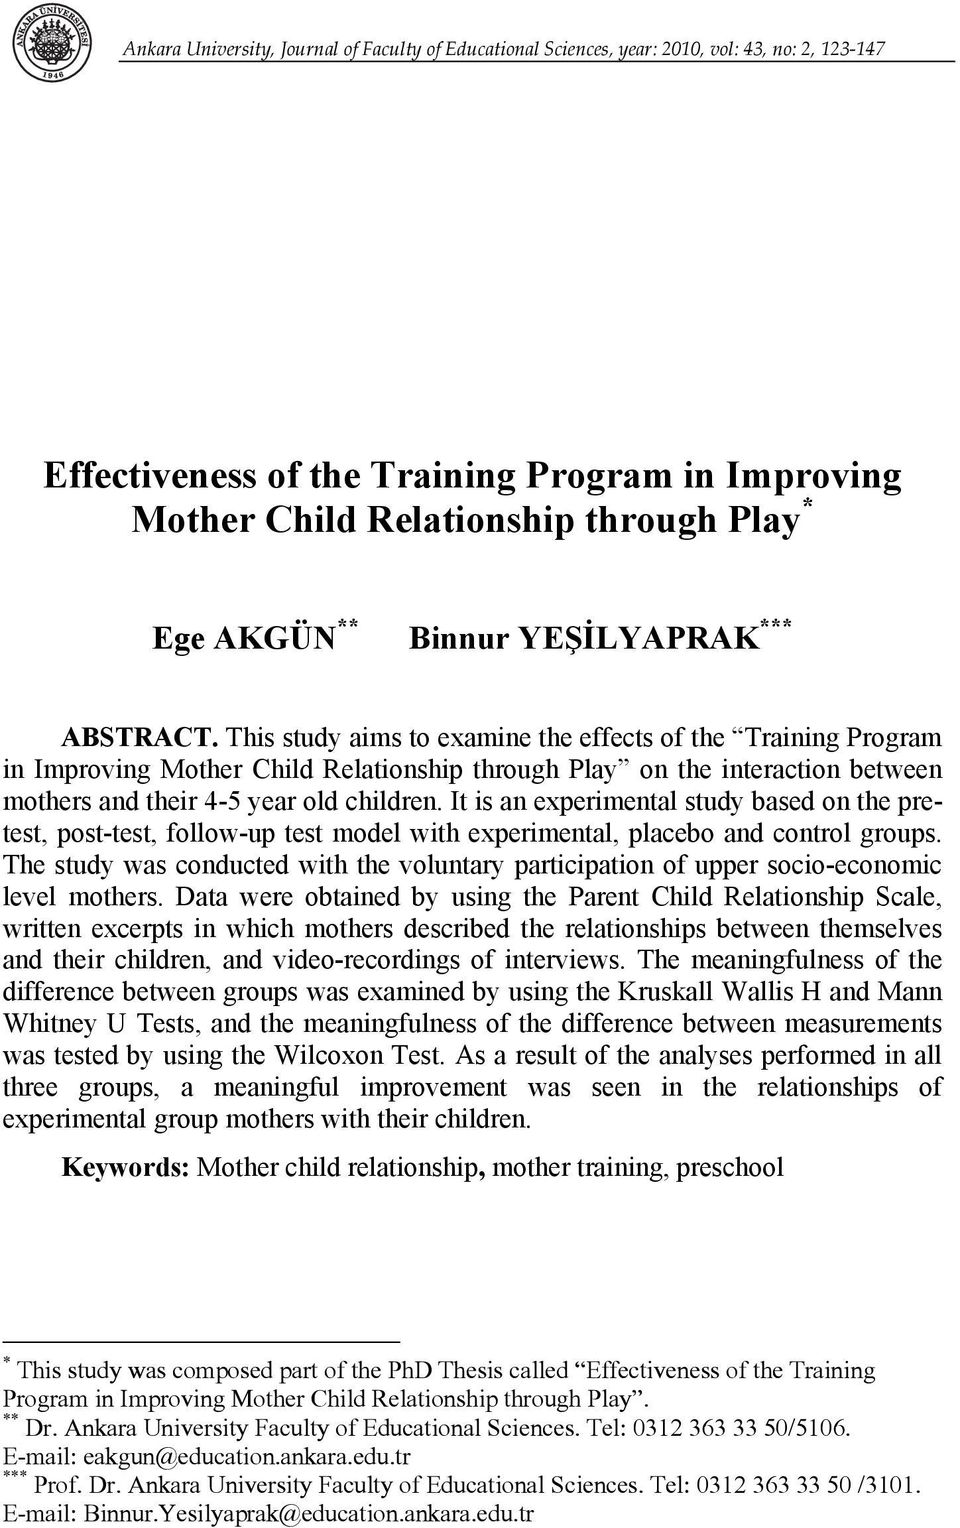 This study aims to examine the effects of the Training Program in Improving Mother Child Relationship through Play on the interaction between mothers and their 4-5 year old children.